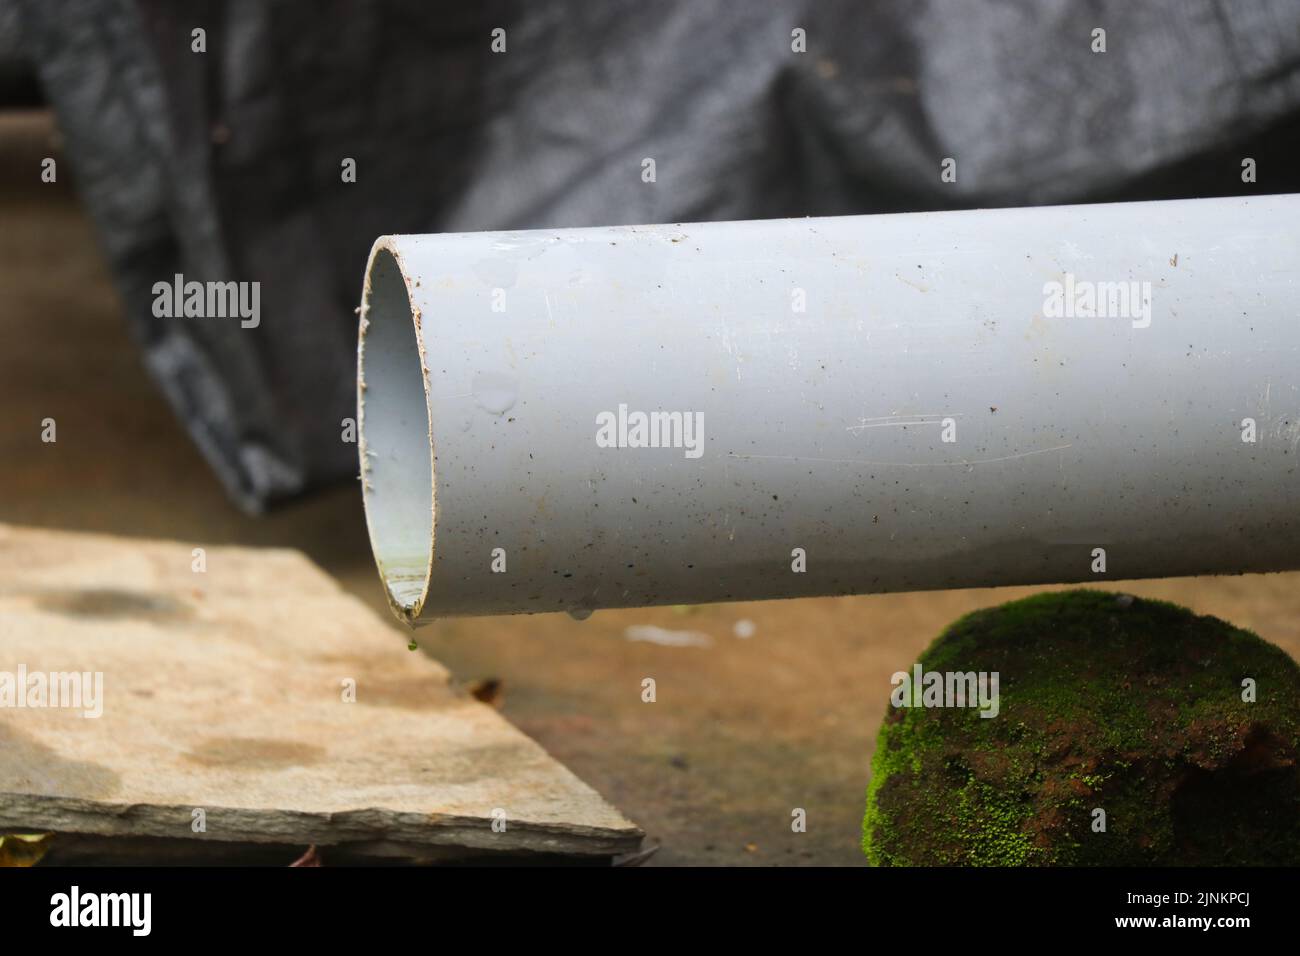 Medium size PVC pipe or hose used as water drainage with a close view Stock Photo